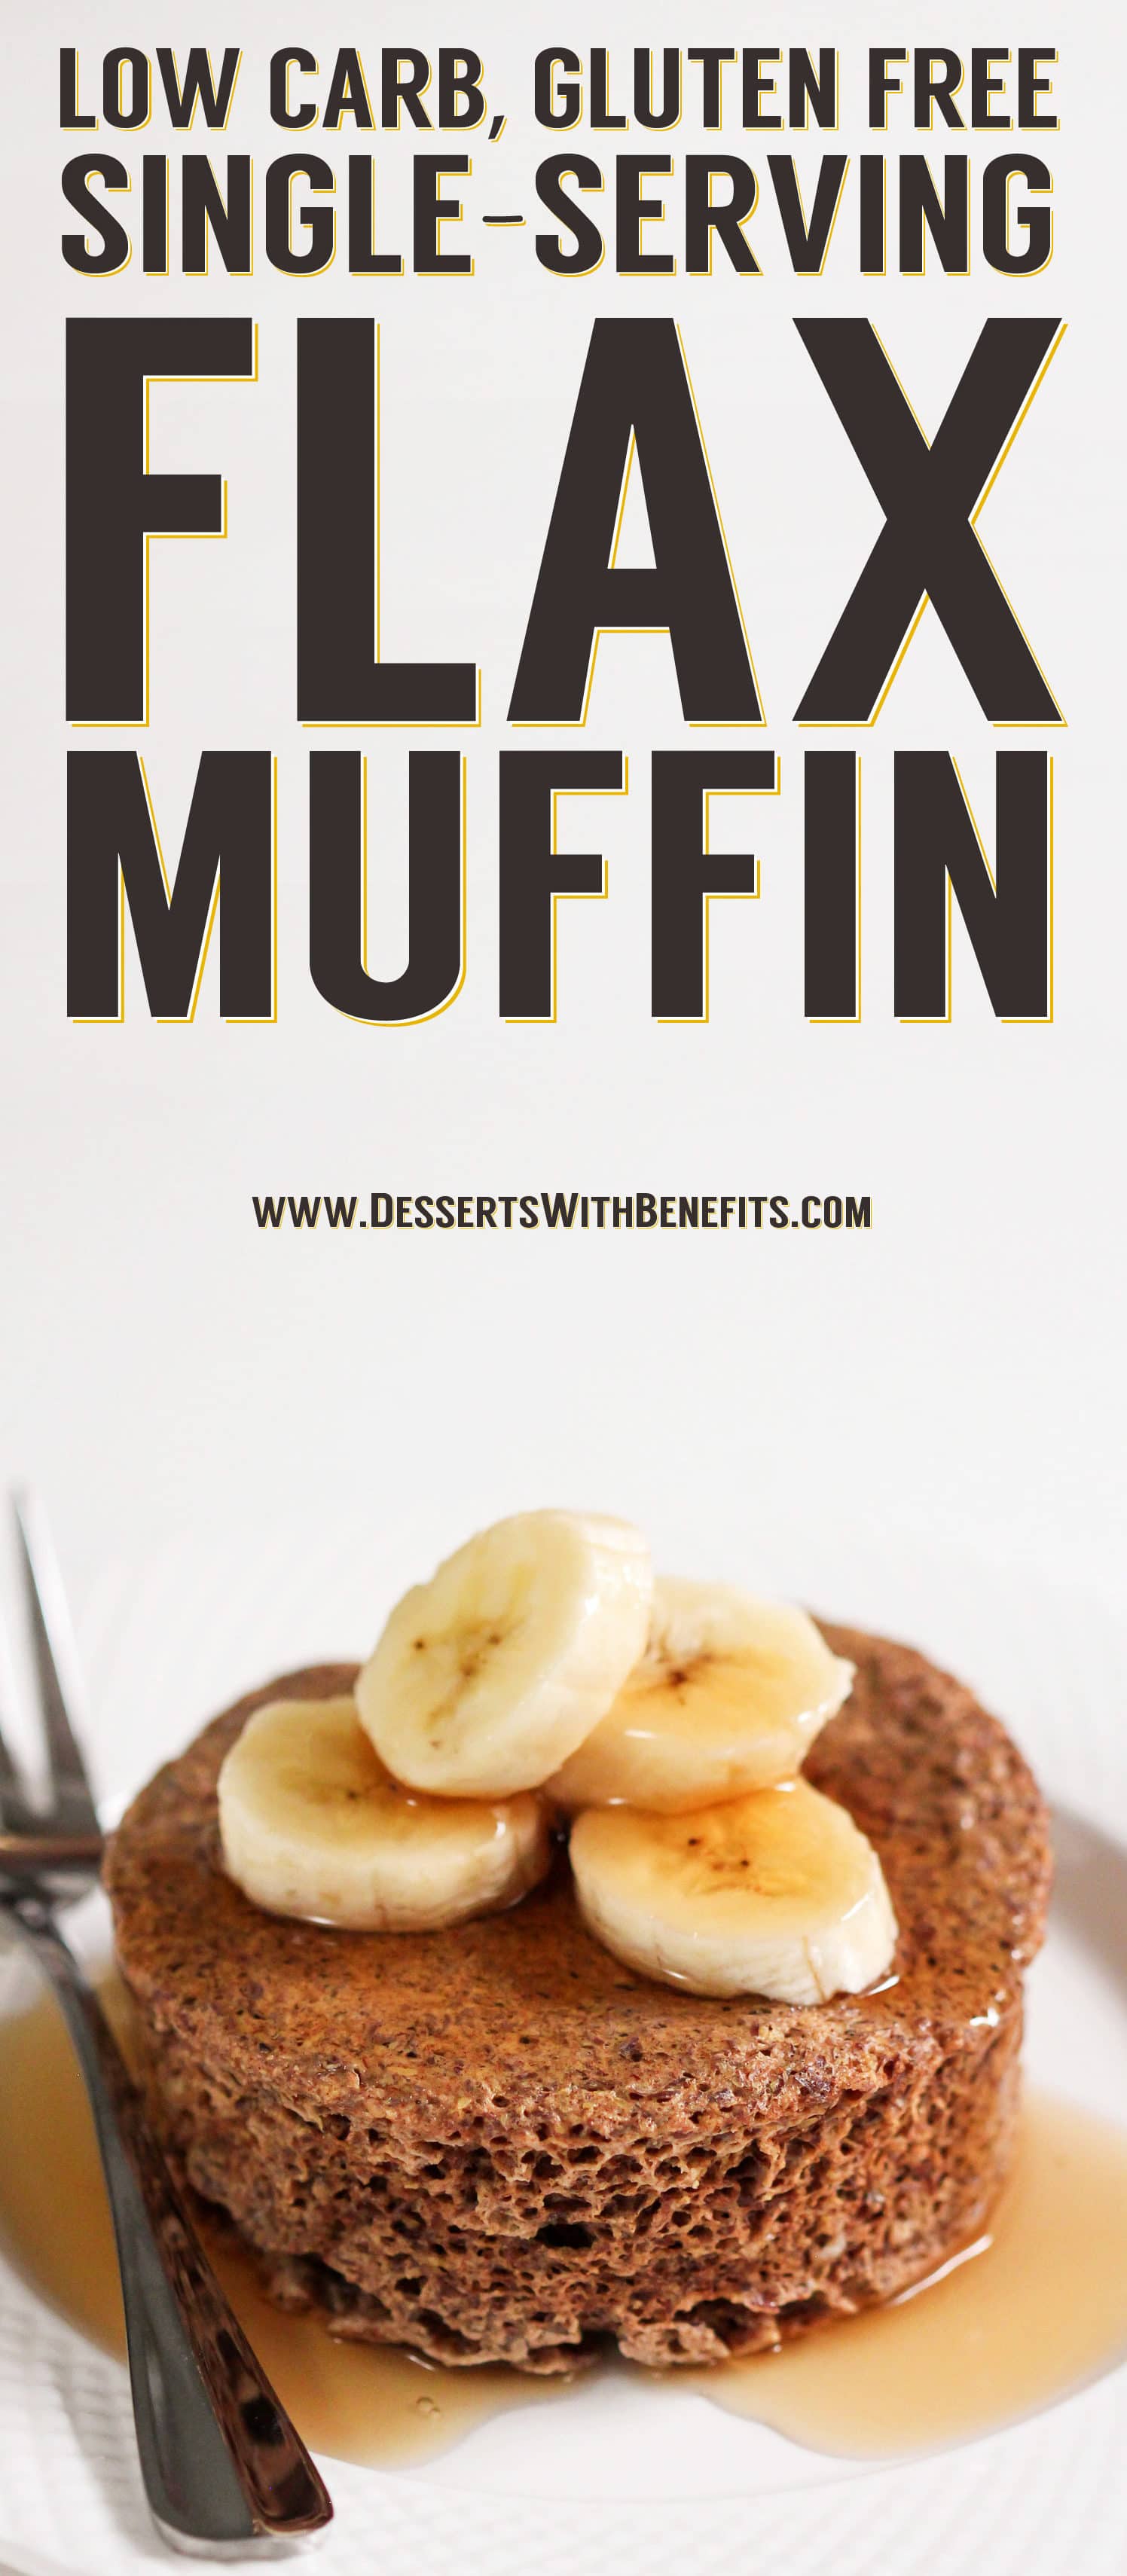 You can make this Healthy Single-Serving Flaxseed Microwave Muffin in just 5 minutes flat! This soft, springy, sweet, and hearty muffins makes the perfect balanced breakfast, snack, and dessert. It's hard to believe it's sugar free, low carb, high protein, high fiber, AND gluten free too! Plus, it's full of nutritious omega-3 fatty acids, vitamins and minerals. Healthy dessert recipes at the Desserts With Benefits Blog (www.DessertsWithBenefits.com)